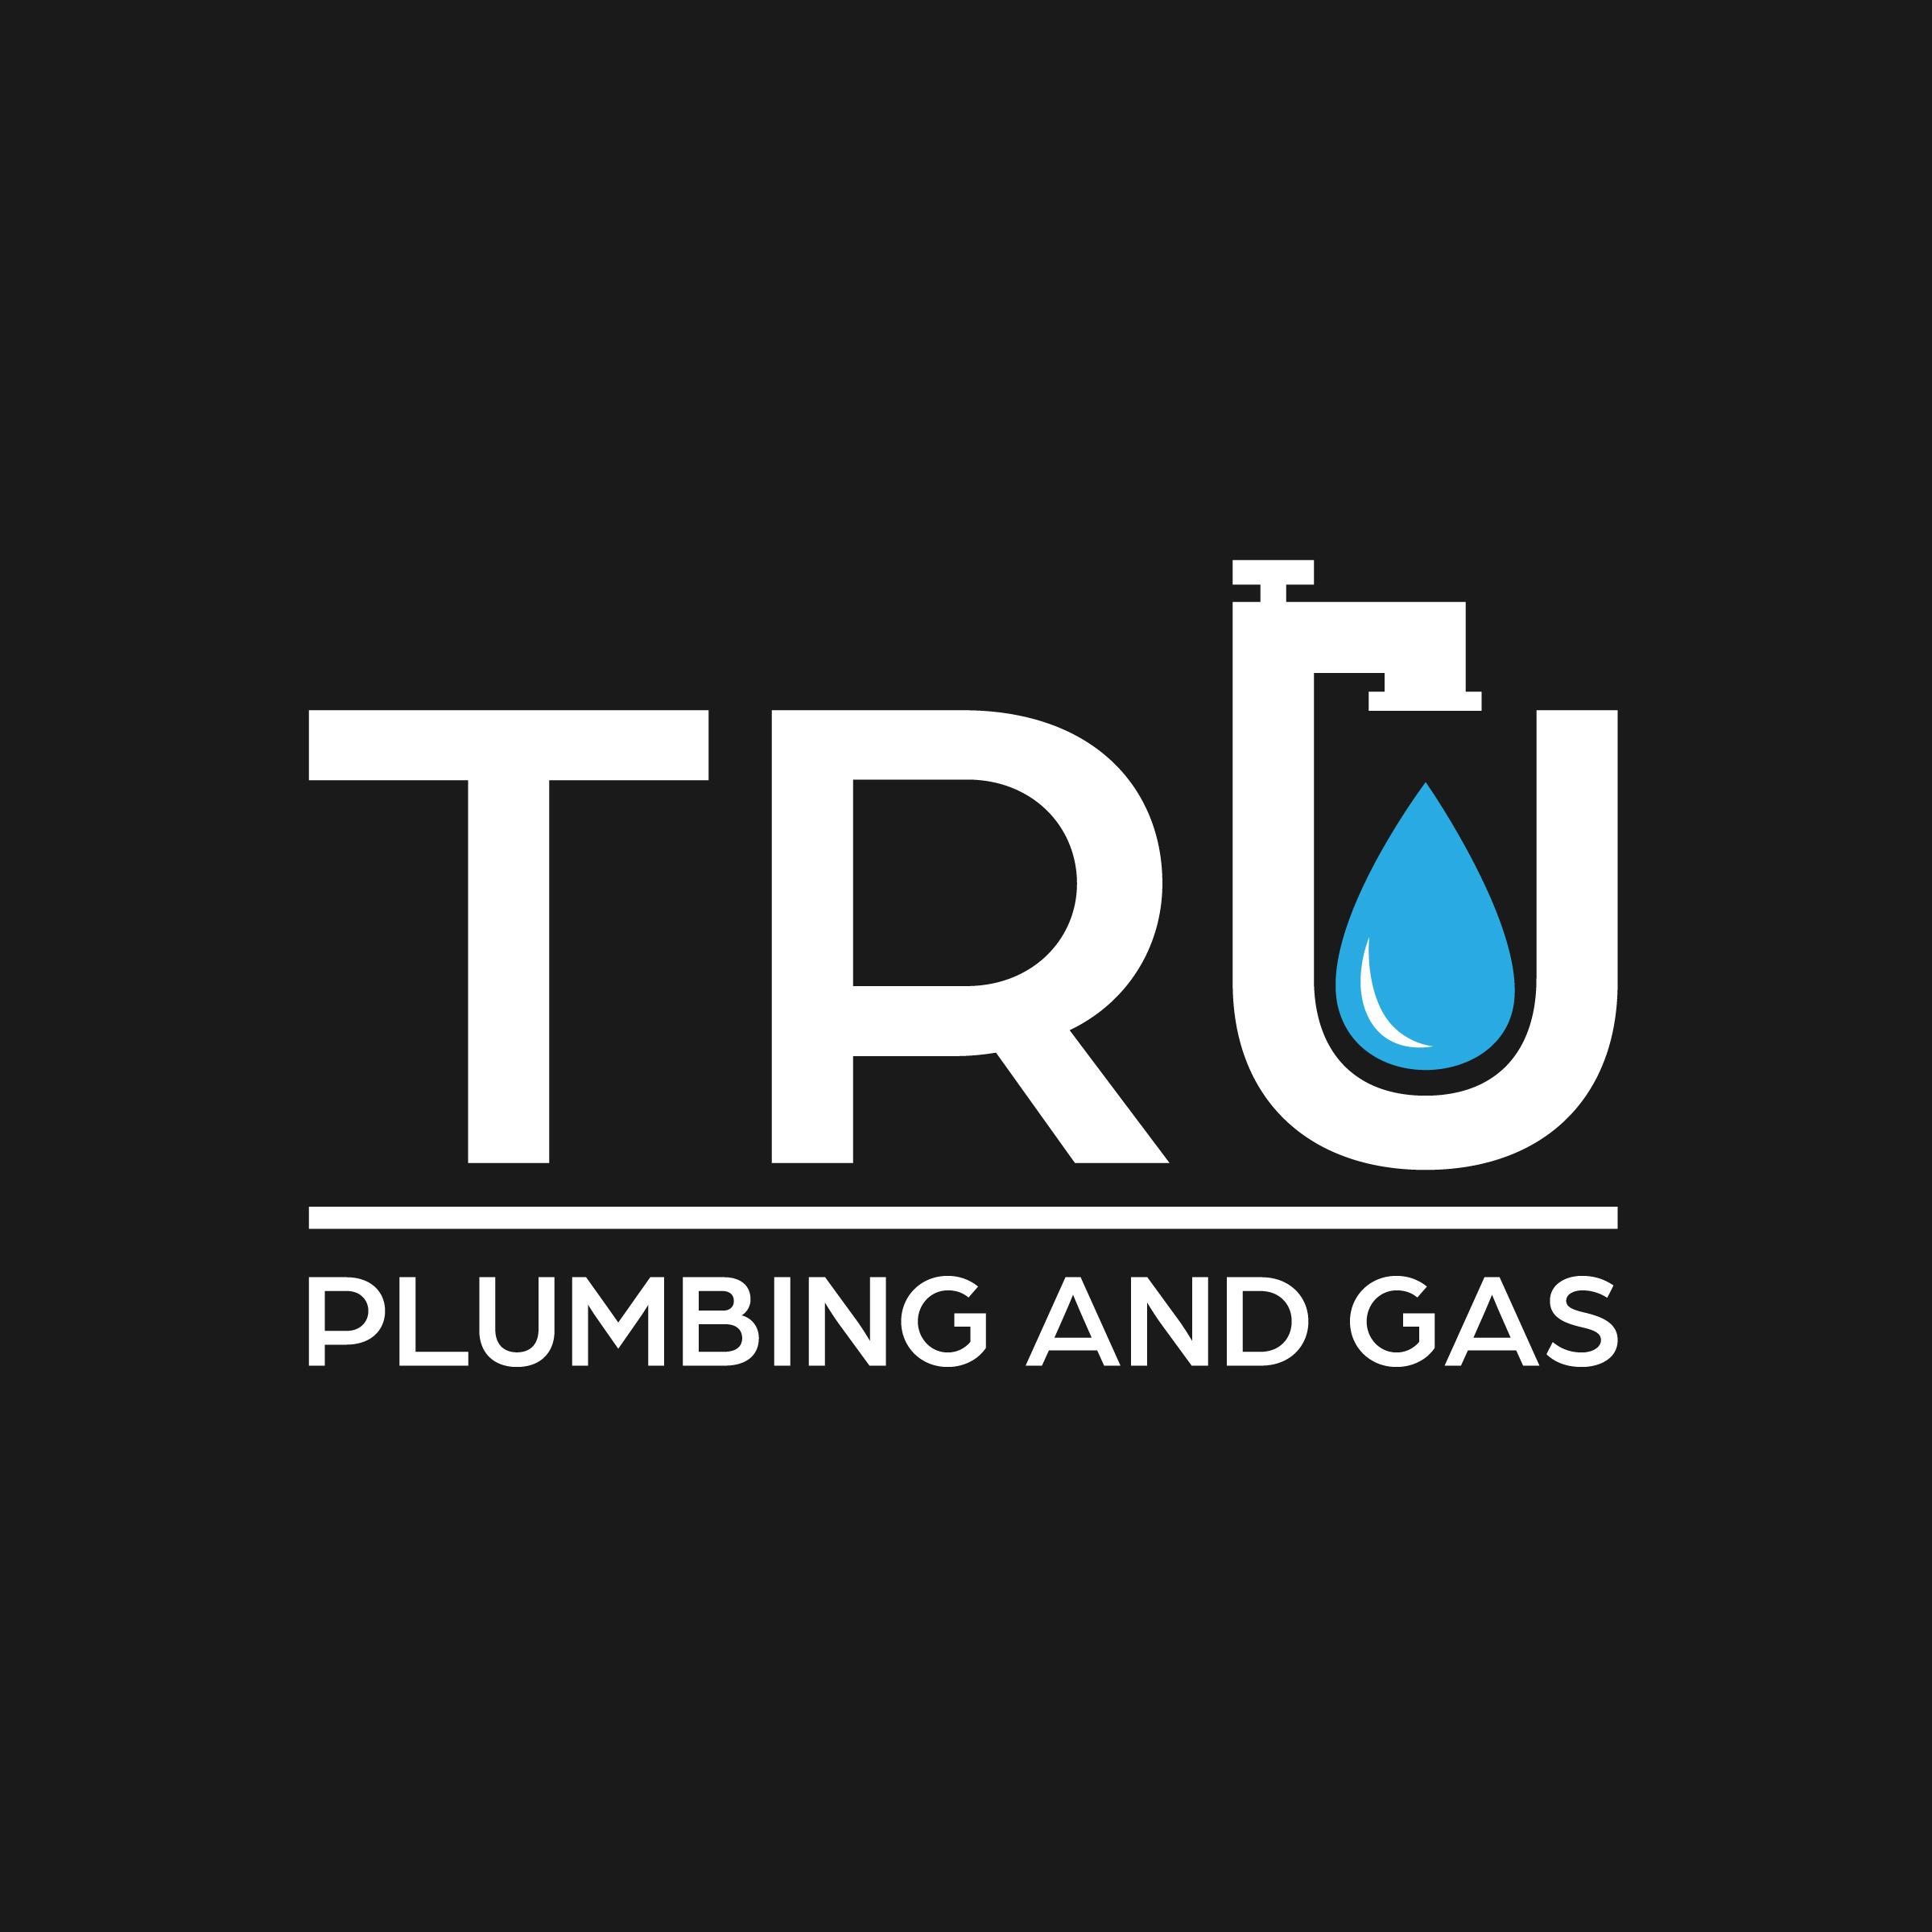 Tru Plumbing and Gas - Niceville, FL 32578 - (850)533-1252 | ShowMeLocal.com